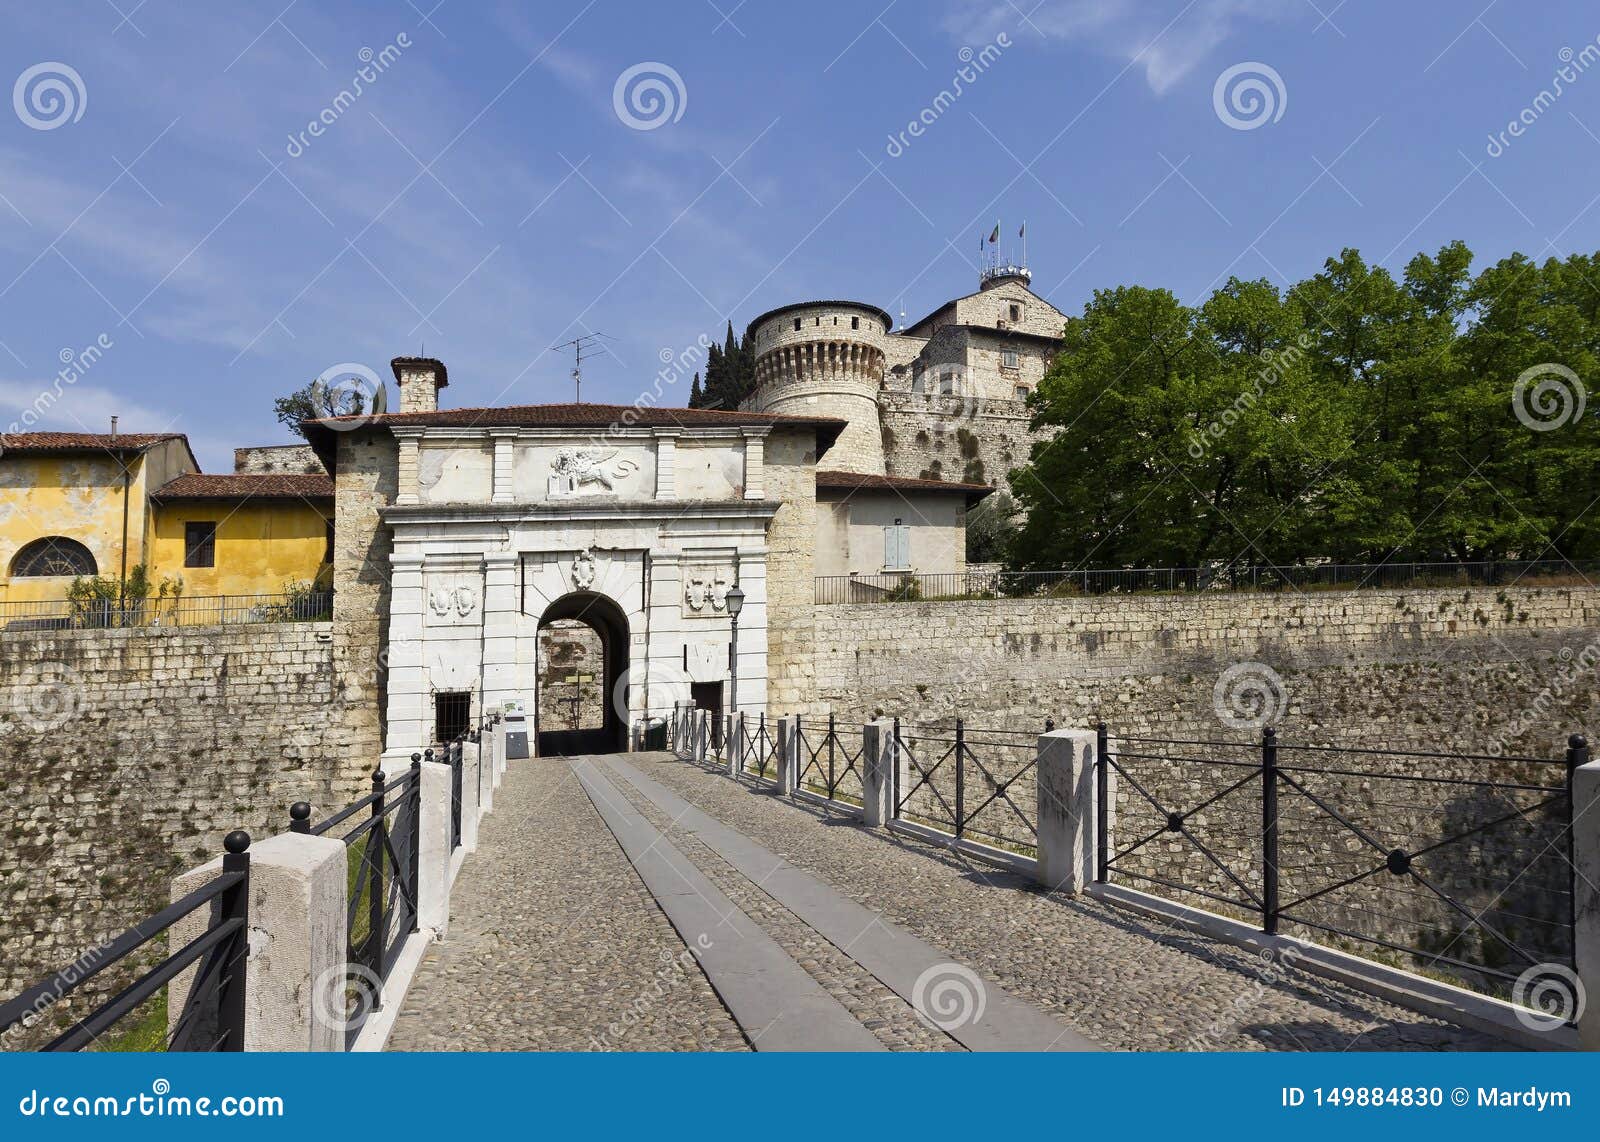 castle of brescia is the medieval castle complex on top of cidneo hill